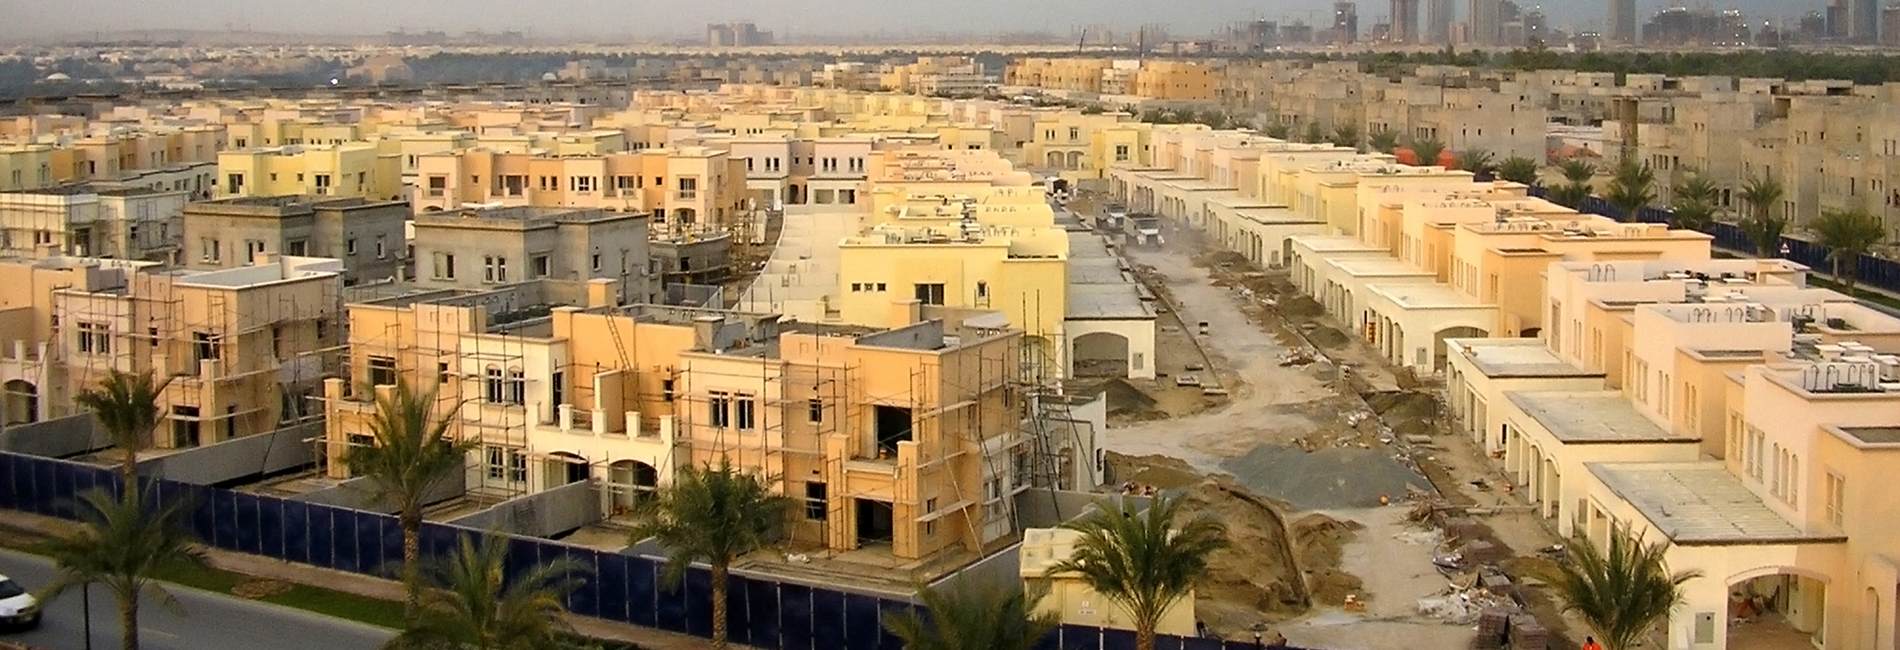 <strong>Trust at Work since 1974 </strong><br/><br/><span>The Lakes Maeen Neighbourhood - Dubai</span> 